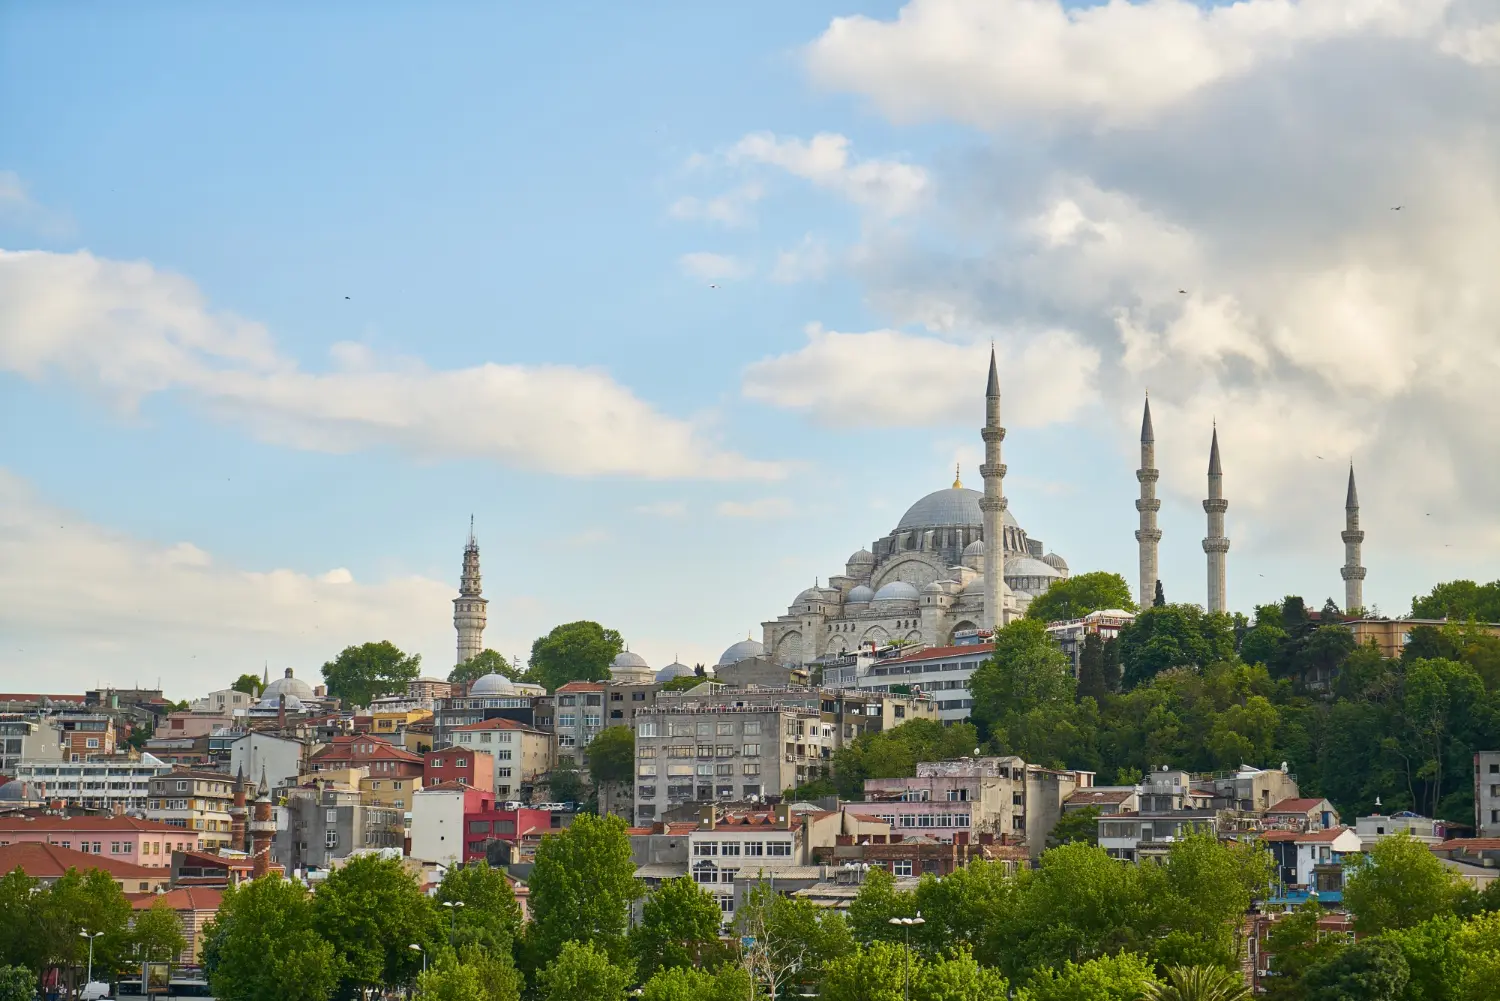 Sultanahmet is known as an indispensable stop for those who want to explore the history and culture of Istanbul.